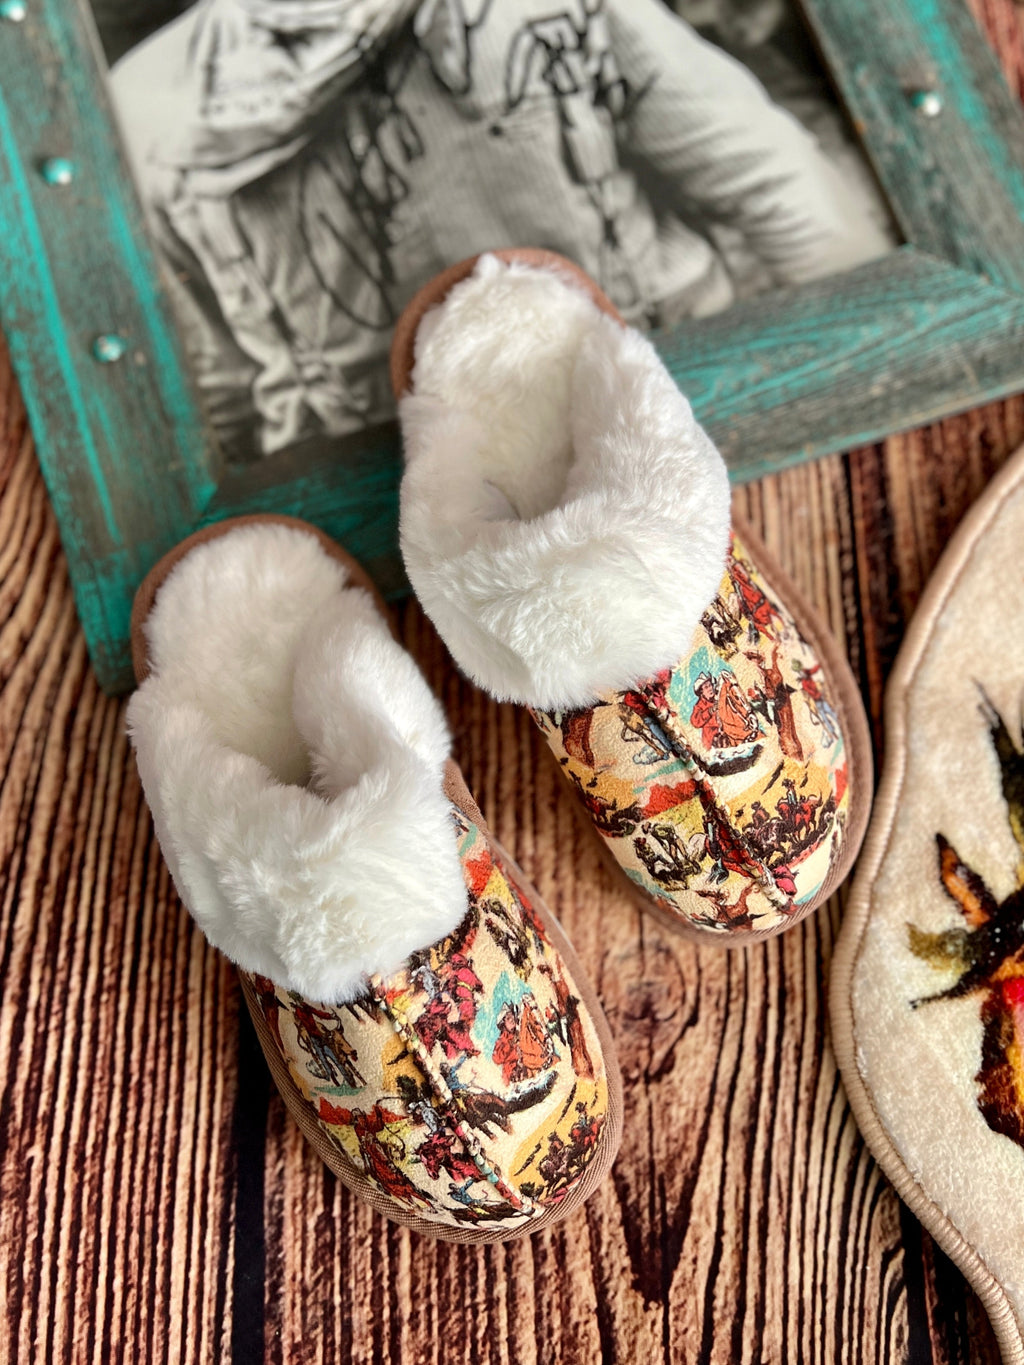 Cowboy Collage Slippers | Gussied Up Online Western style slippers.